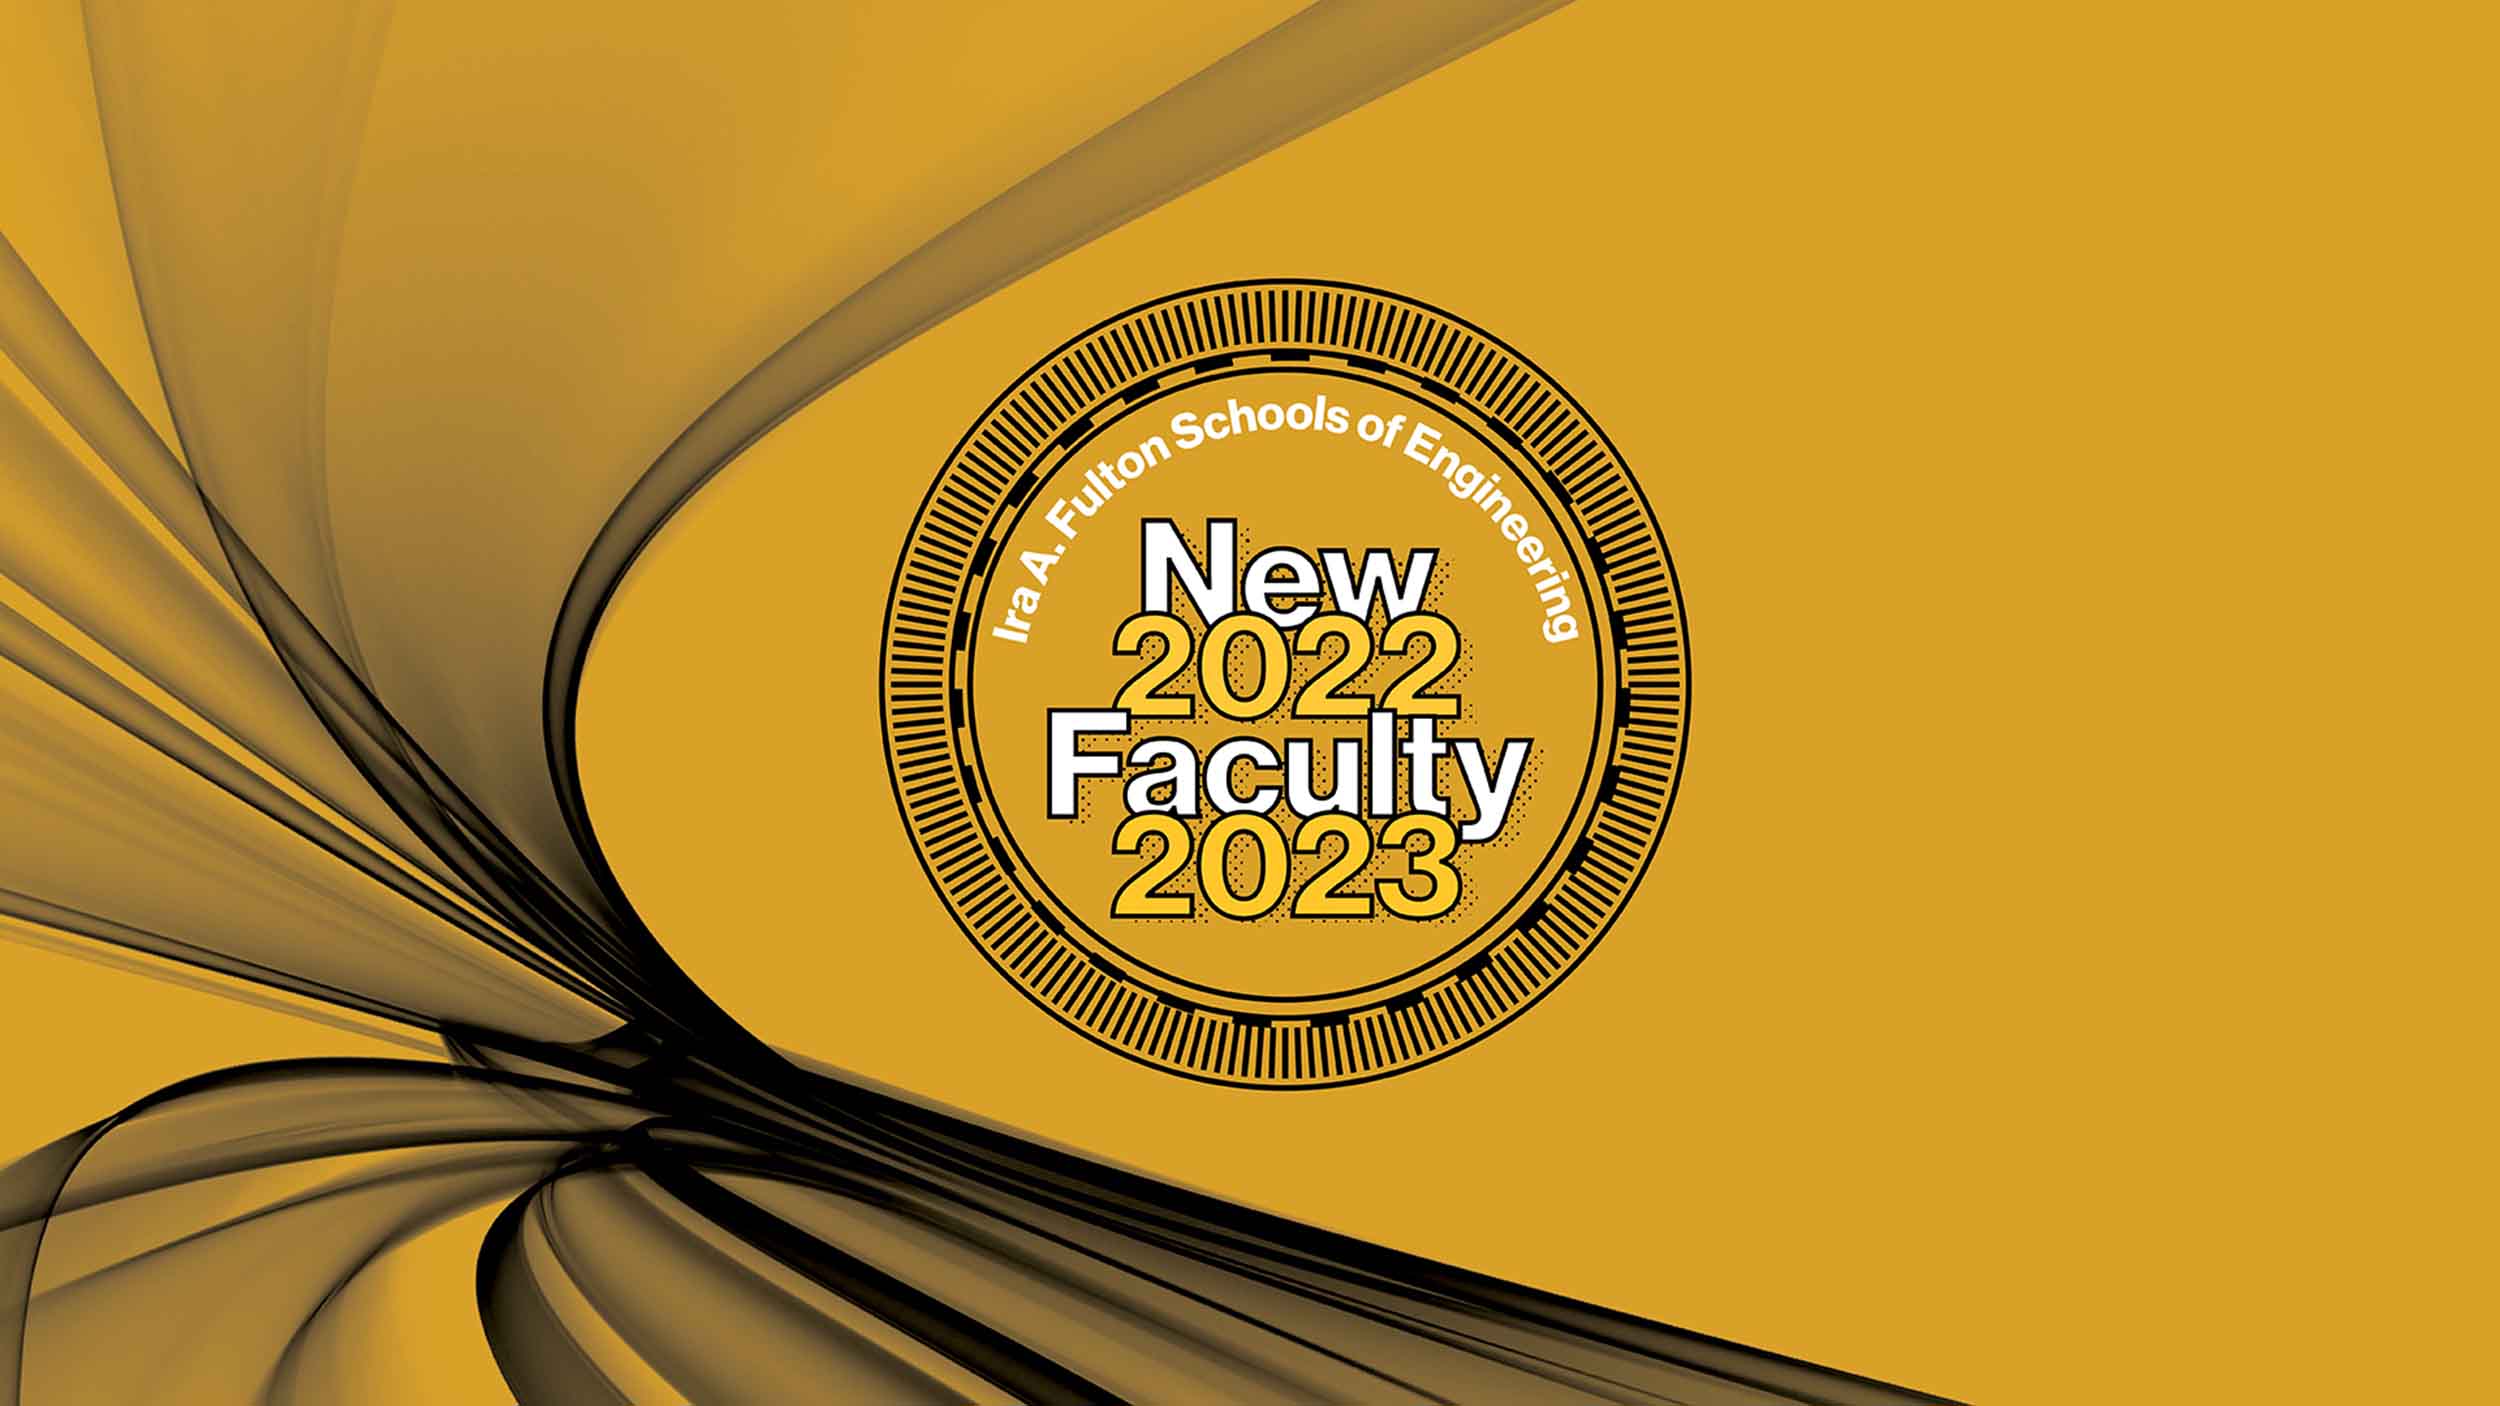 Ira A. Fulton Schools of Engineering New Faculty 2022-2023 emblem